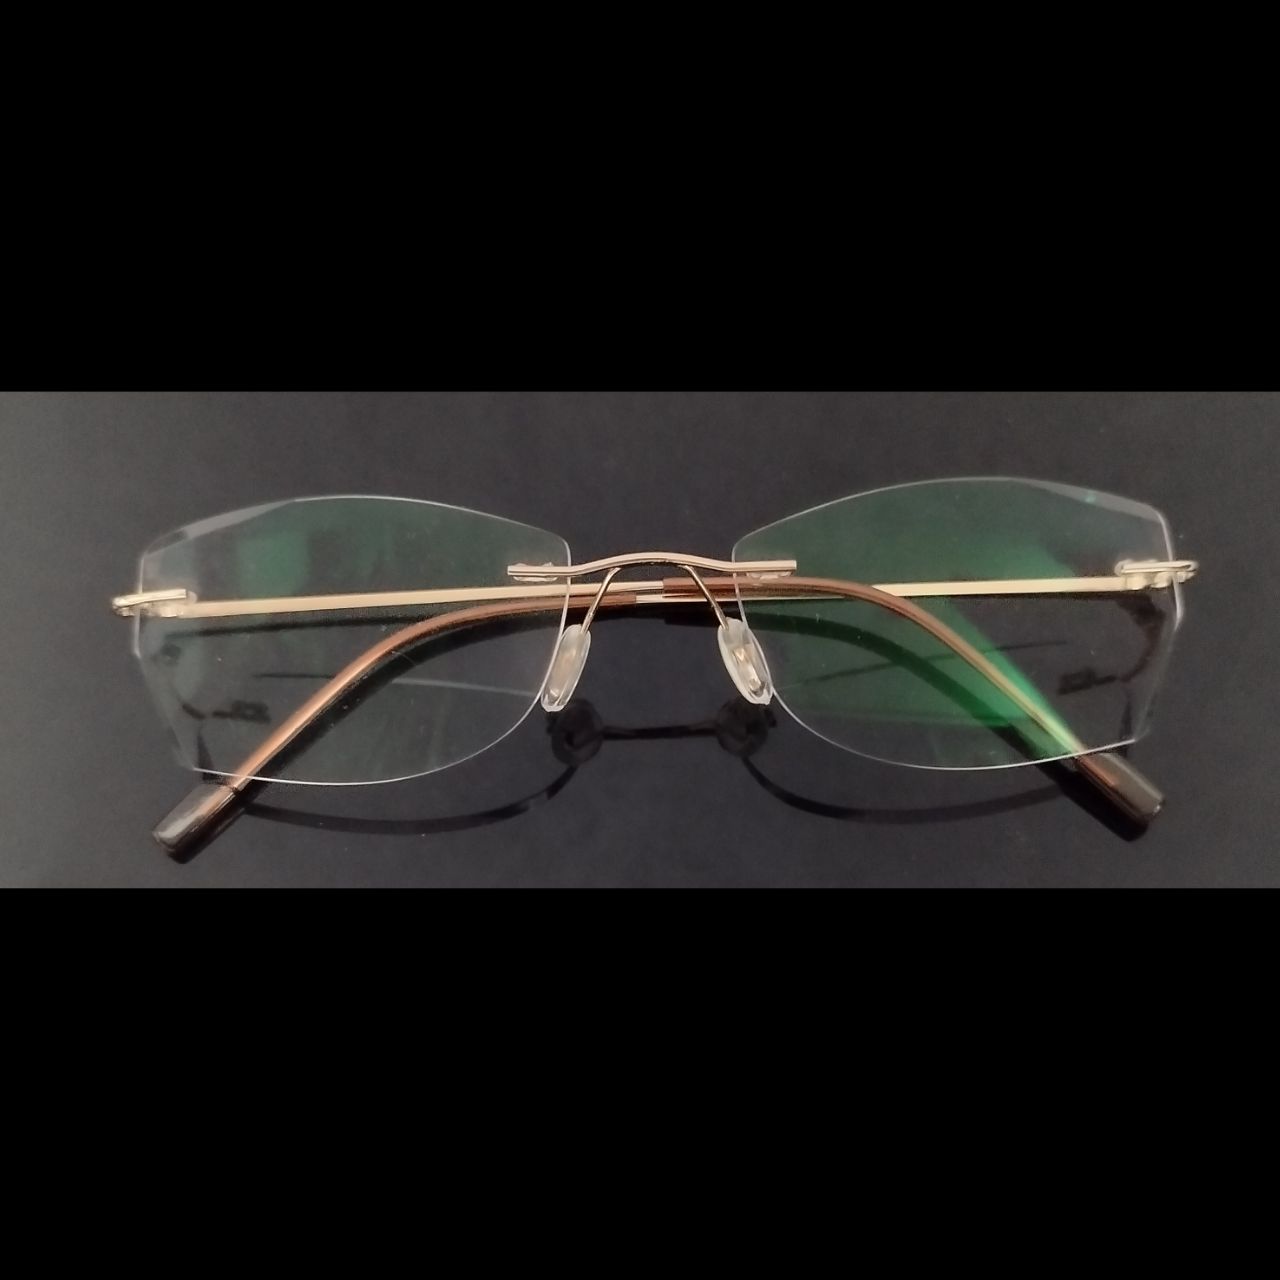 Gold Luxe Luminaries - Rimless Executive Glasses